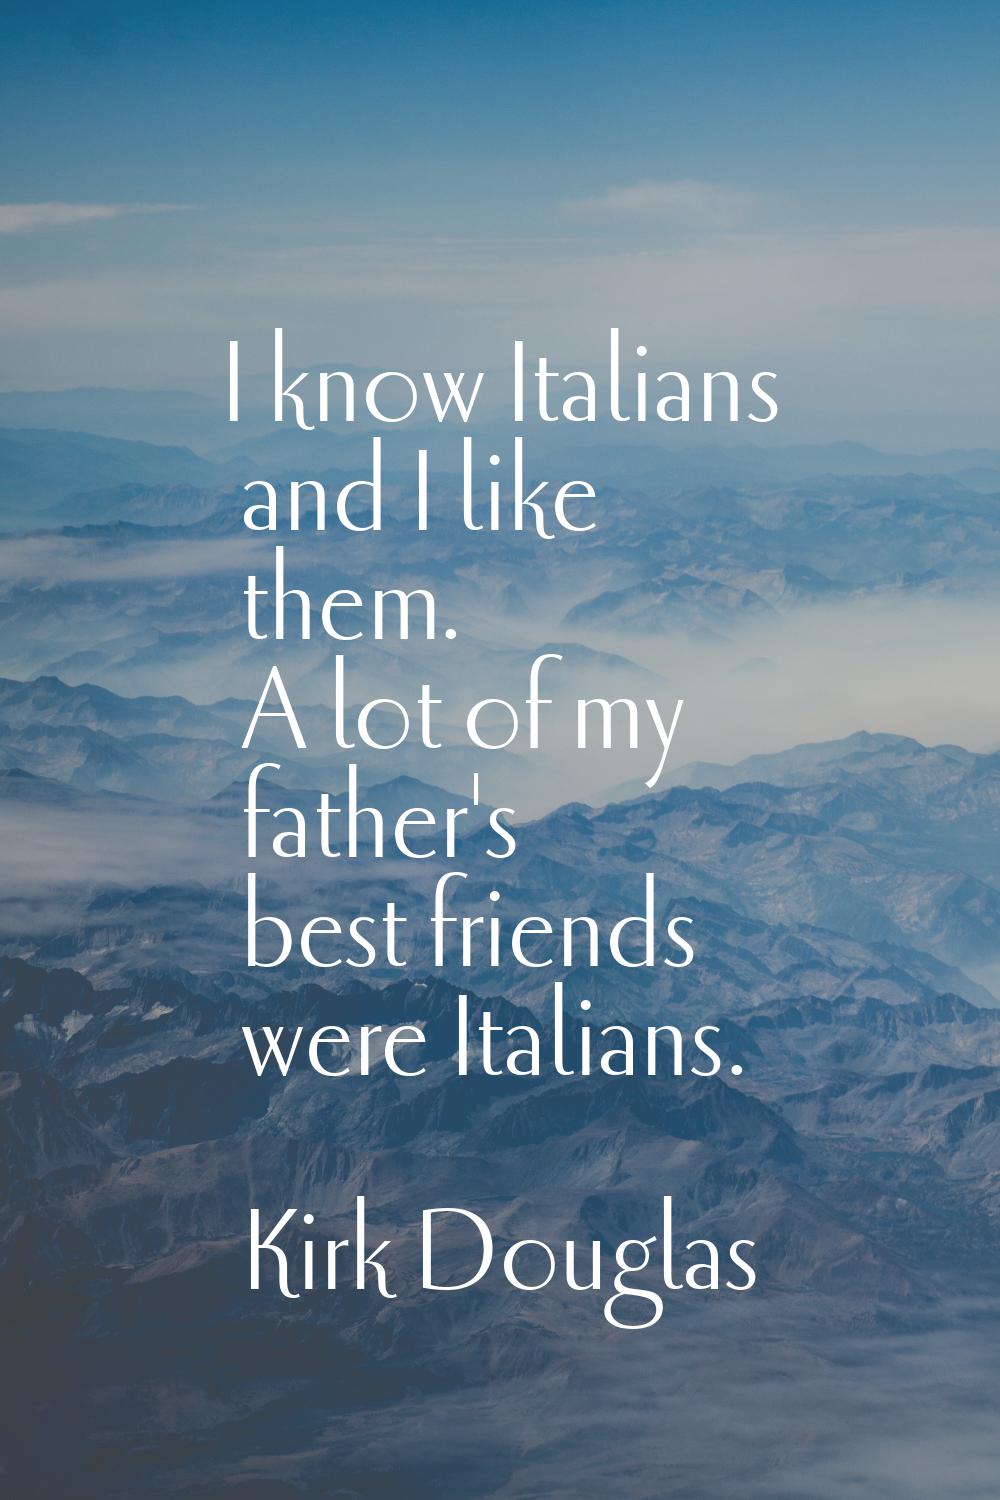 I know Italians and I like them. A lot of my father's best friends were Italians.